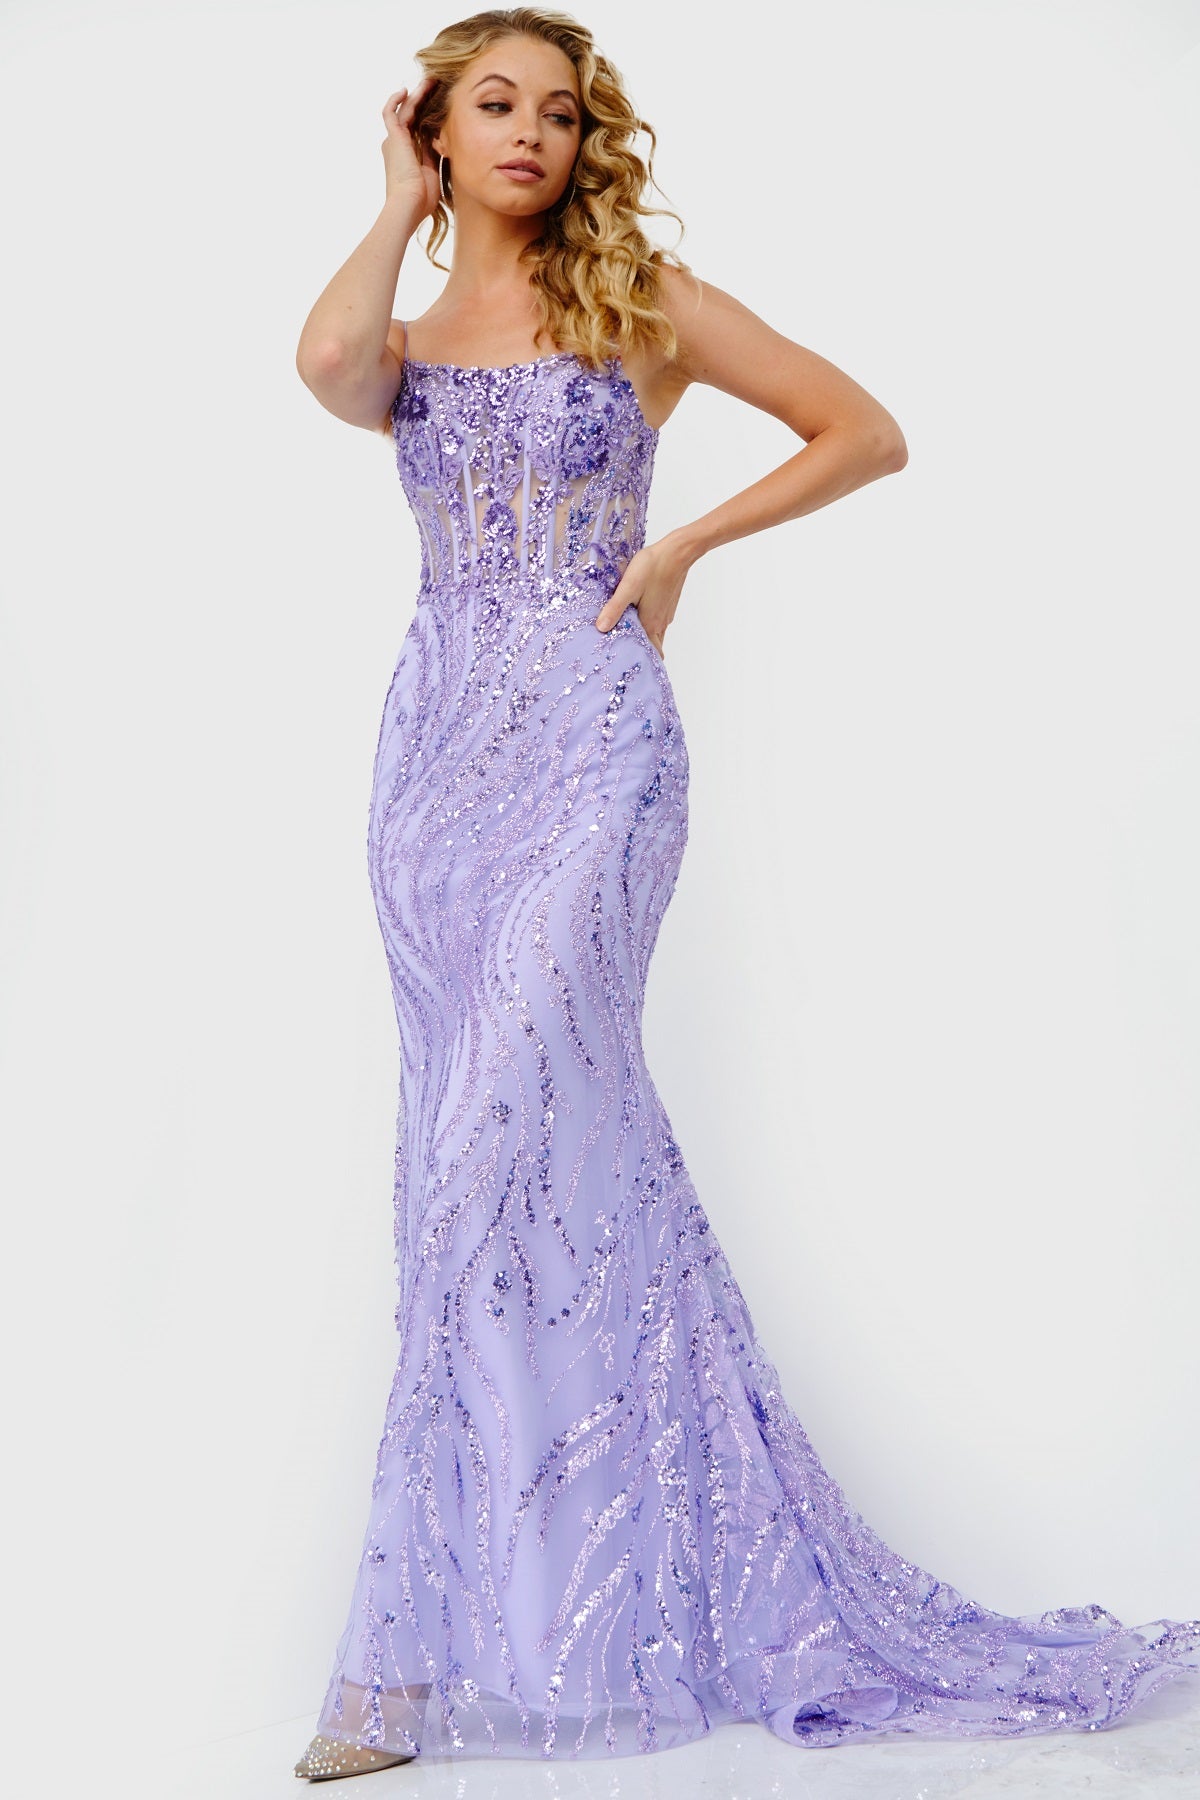 This spectacular Jovani JVN23250 piece flaunts a glitter and sequin-embellished bodice and sparkling train with horsehair trim, offering a form-fitting silhouette ideal for your prom dress.  Colors:  Lilac, Light Blue